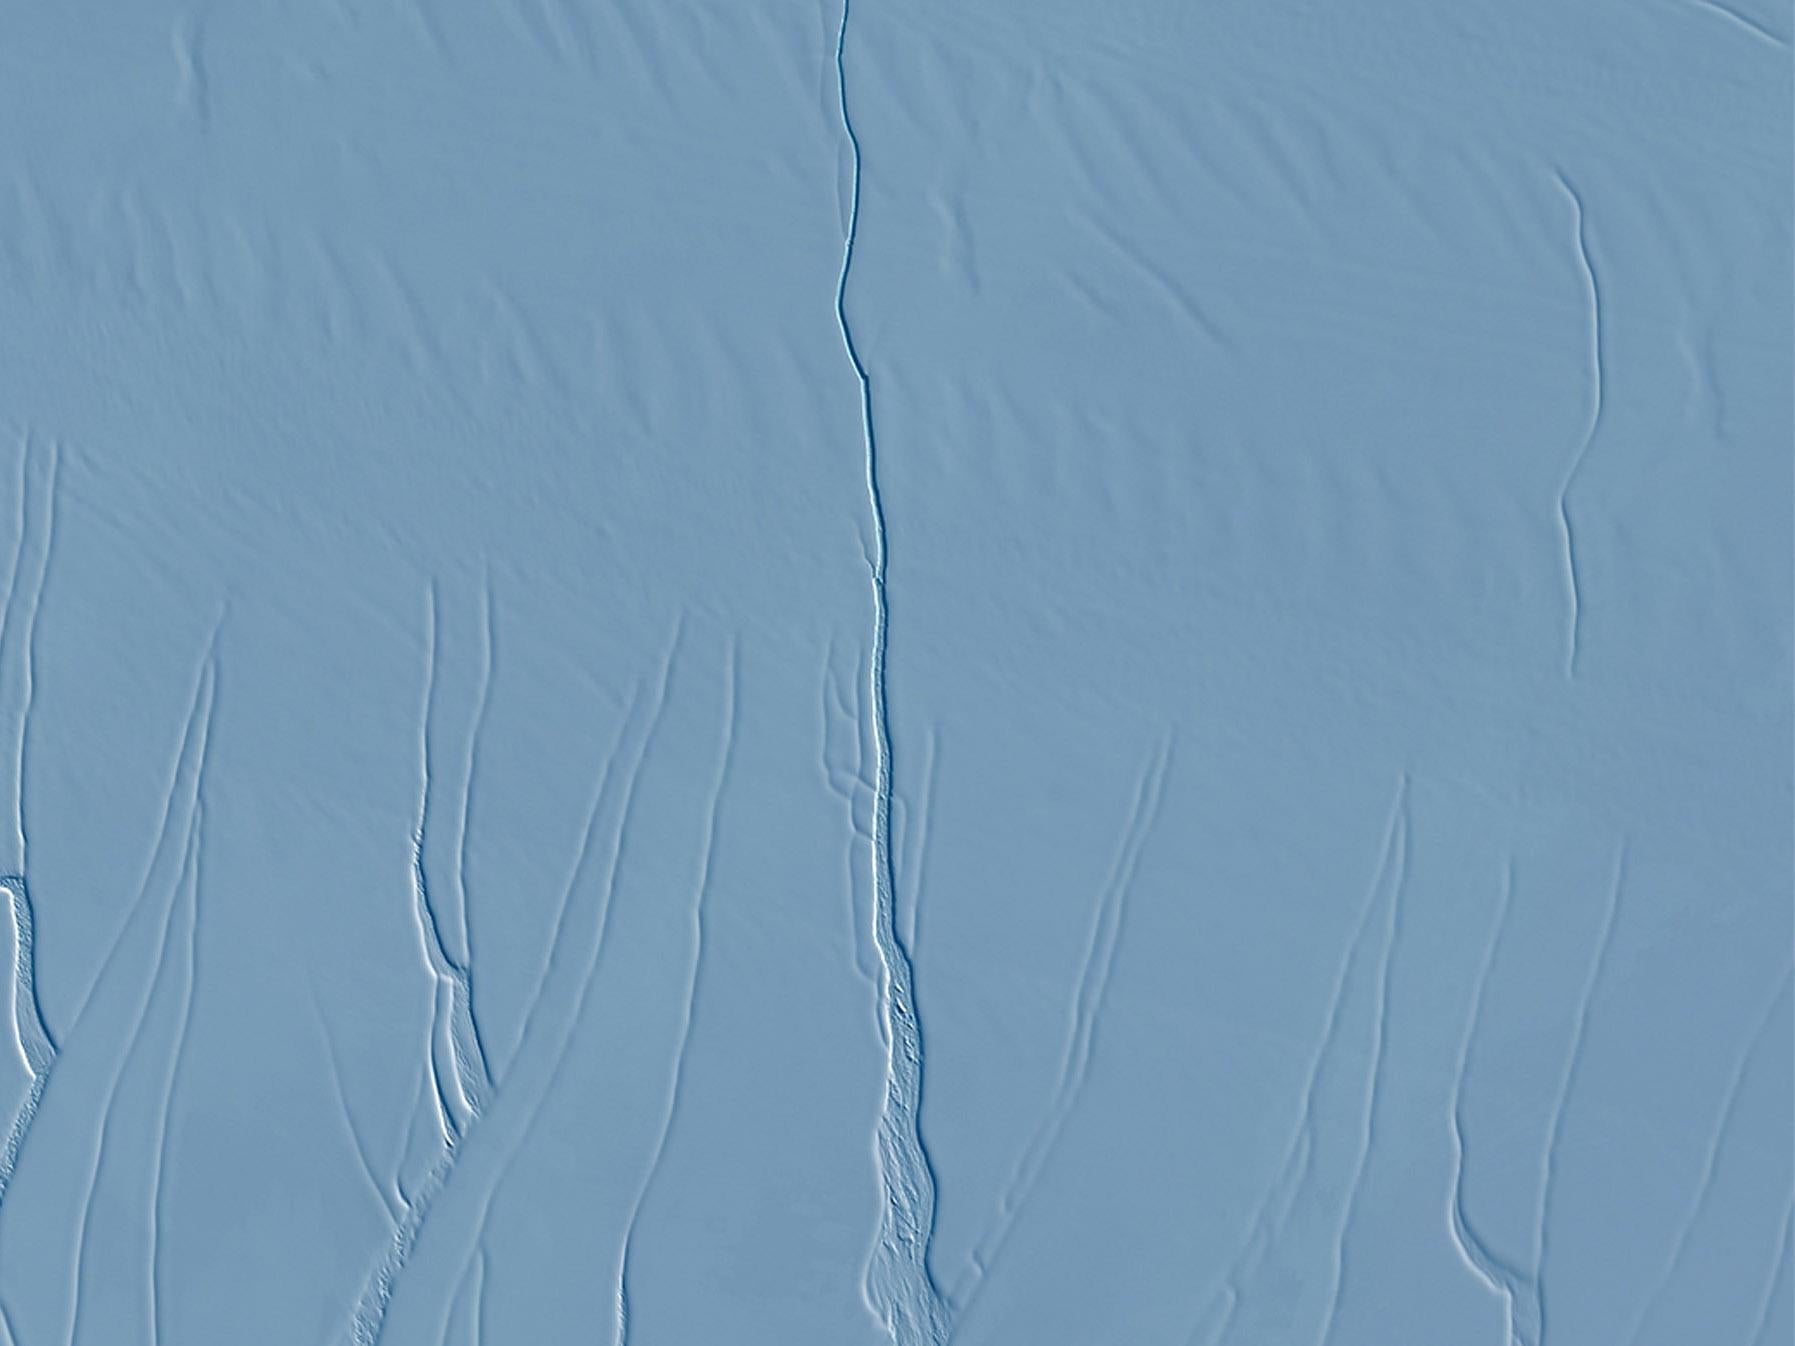 The crack that appeared in the Larsen C ice shelf before a massive section broke away in July